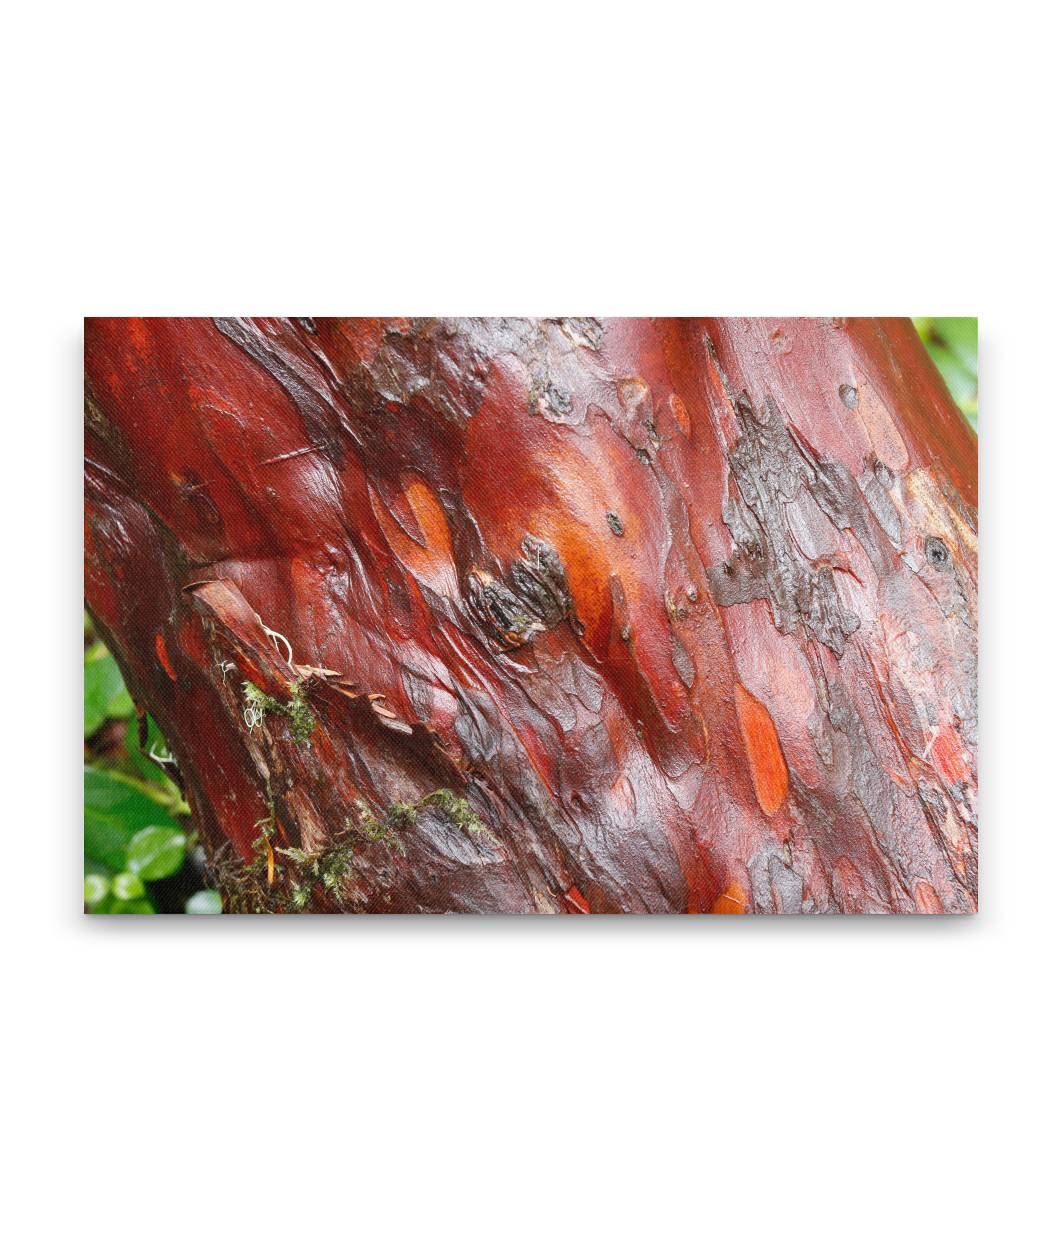 Pacific yew bark closeup, H.J. Andrews Forest, Oregon